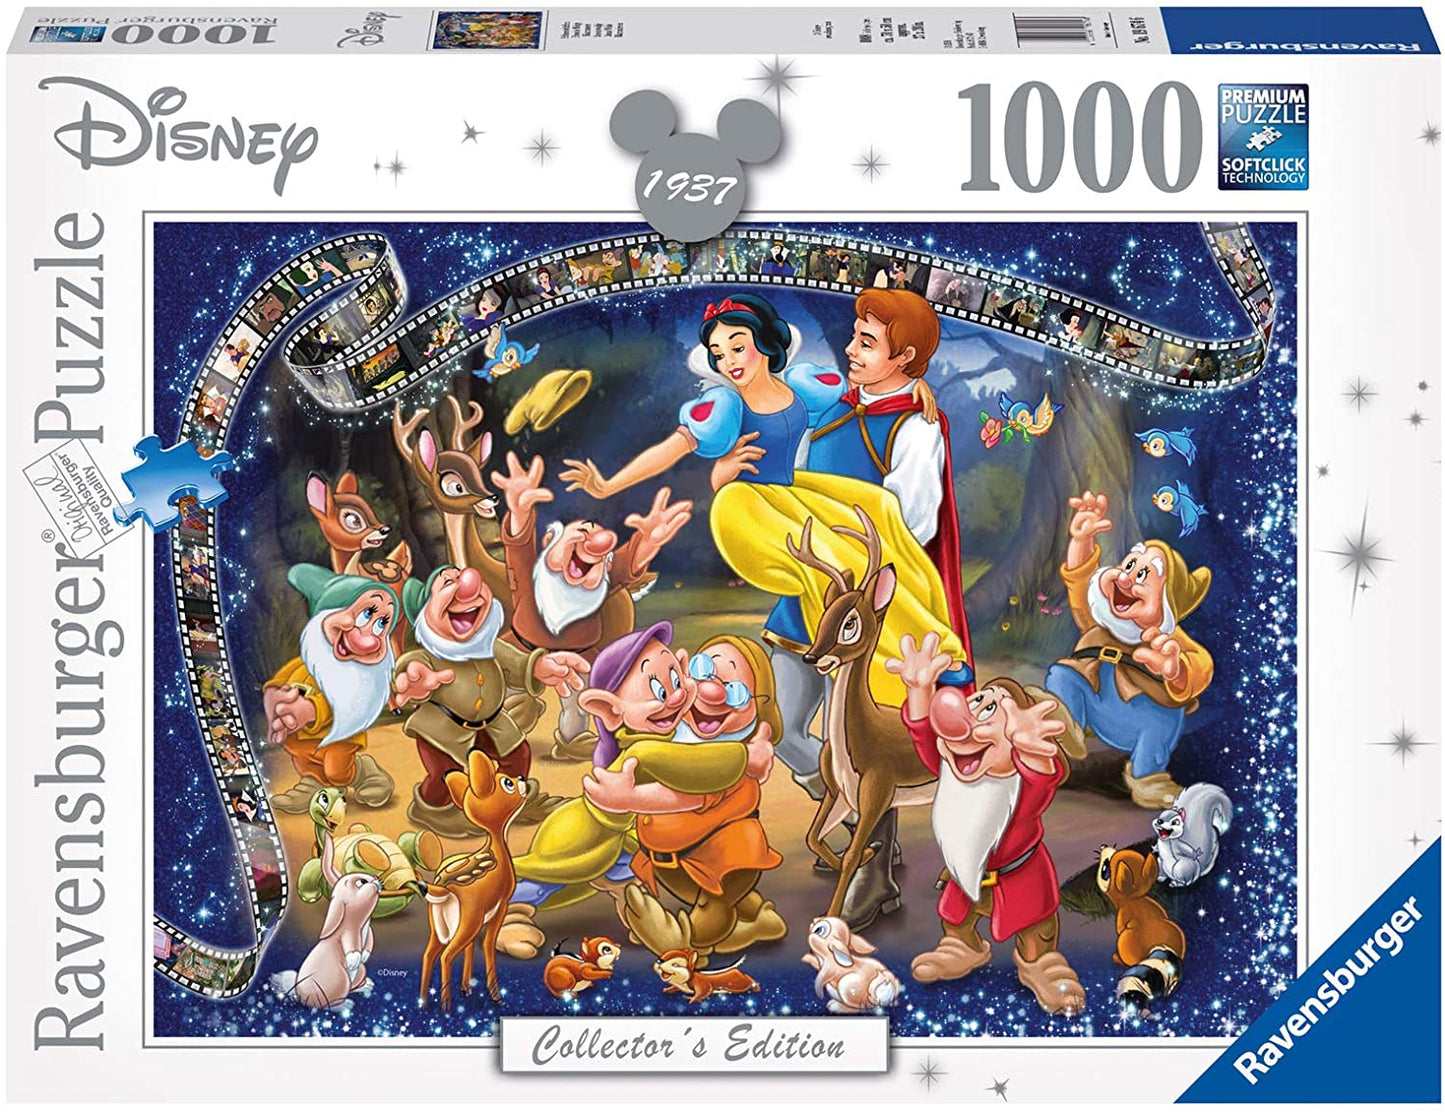 Ravensburger - Disney Collector's Edition Snow White - 1000 Piece Jigsaw Puzzle